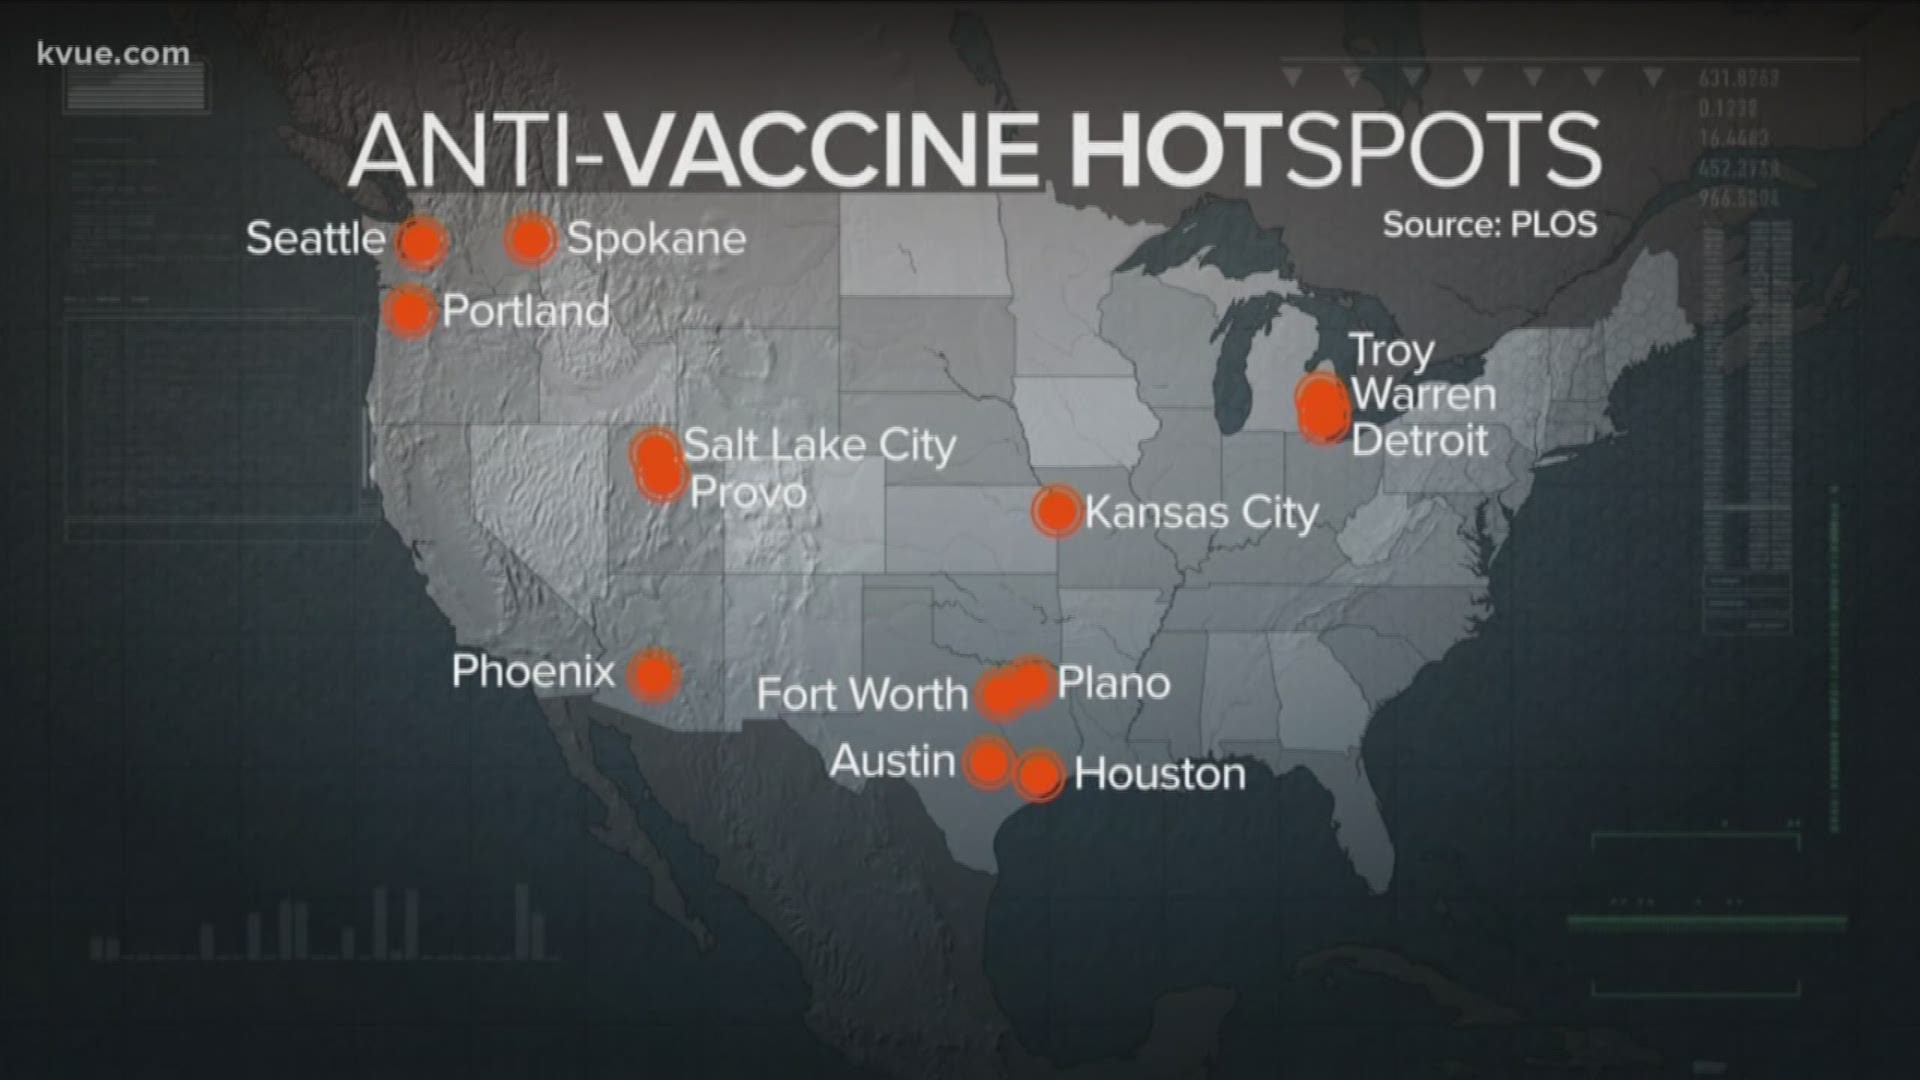 Austin is one of 14 so-called "hot spots" around the U.S. where there's a delay or refusal to vaccinate.